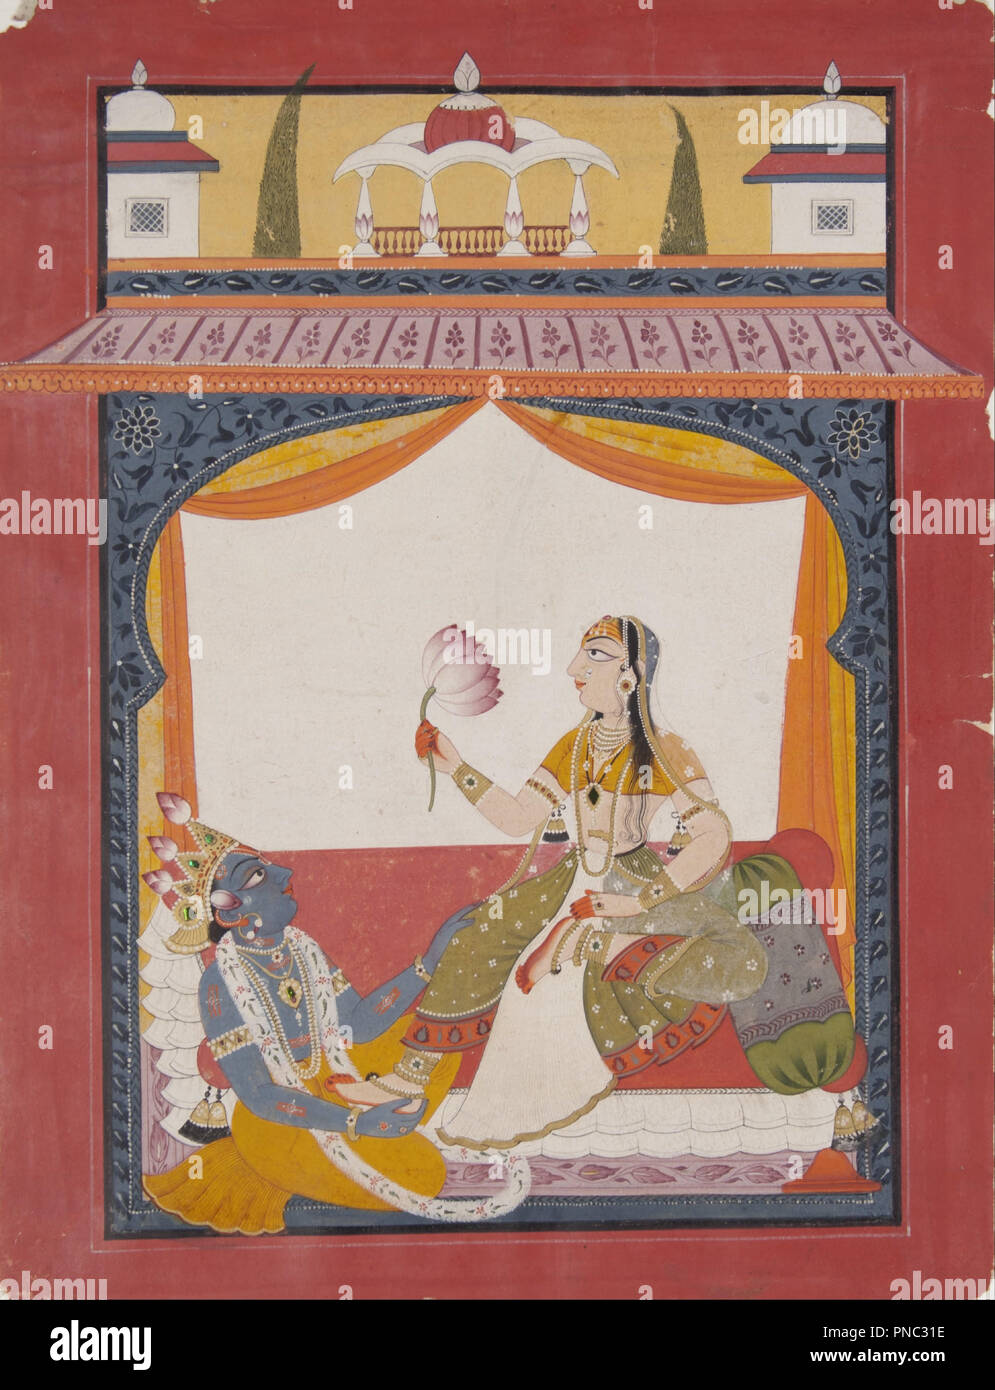 Krishna massaging the feet of Radha, a scene possibly from the Gita Govinda. Date/Period: 1725/1735. Painting. Ink, opaque watercolor, gold, and beetle thorax casings on paper. Width: 20.3 mm. Height: 26.7 mm (work). Author: India, Punjab Hills, Mankot School. Stock Photo